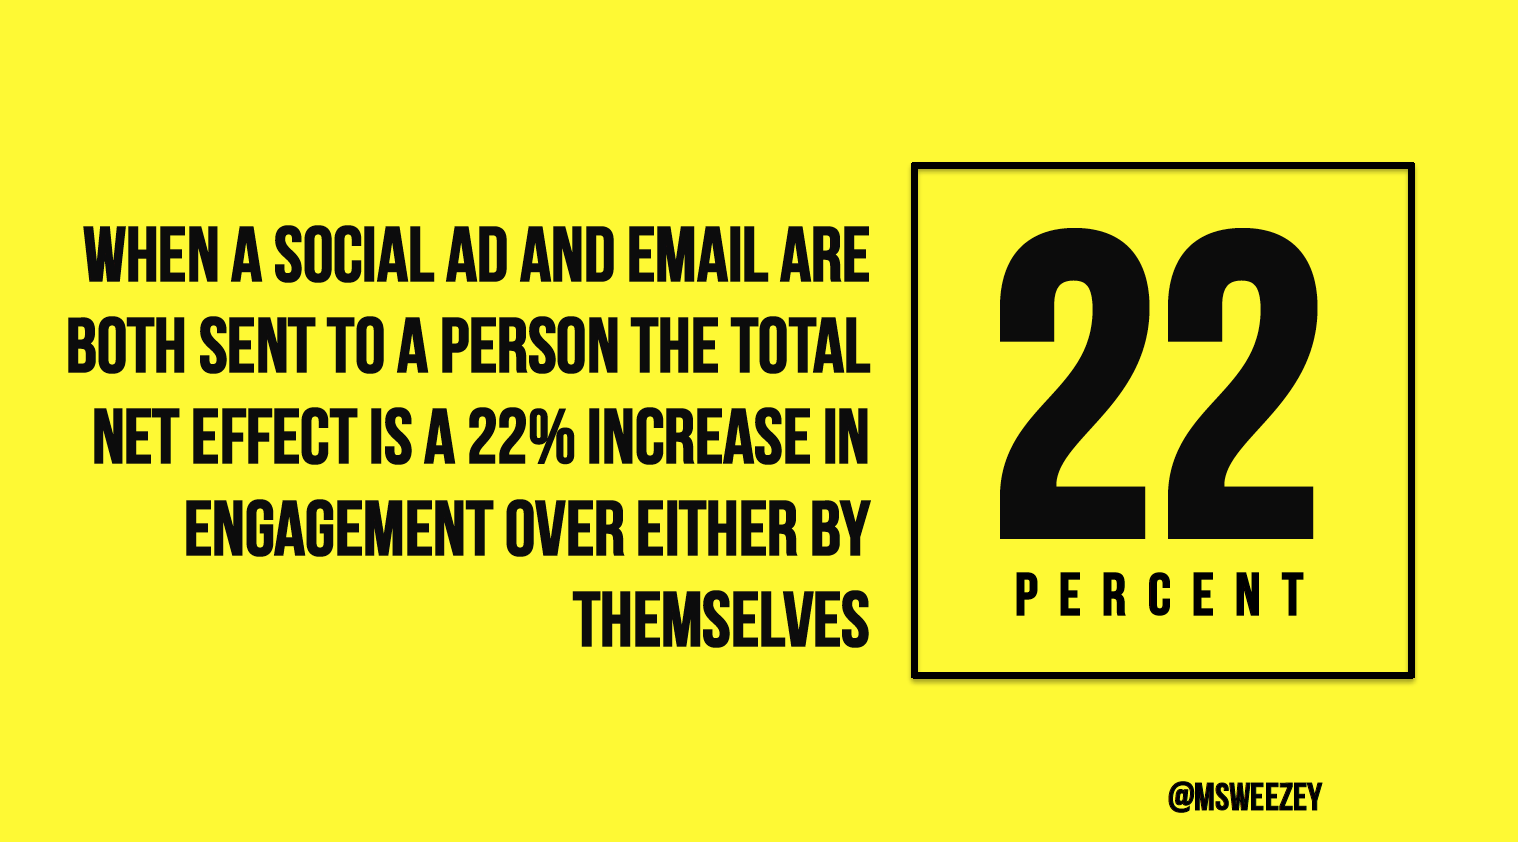 When a social ad and email are both sent to the same person, the net effect is a 22% increase in engagement over either by themselves